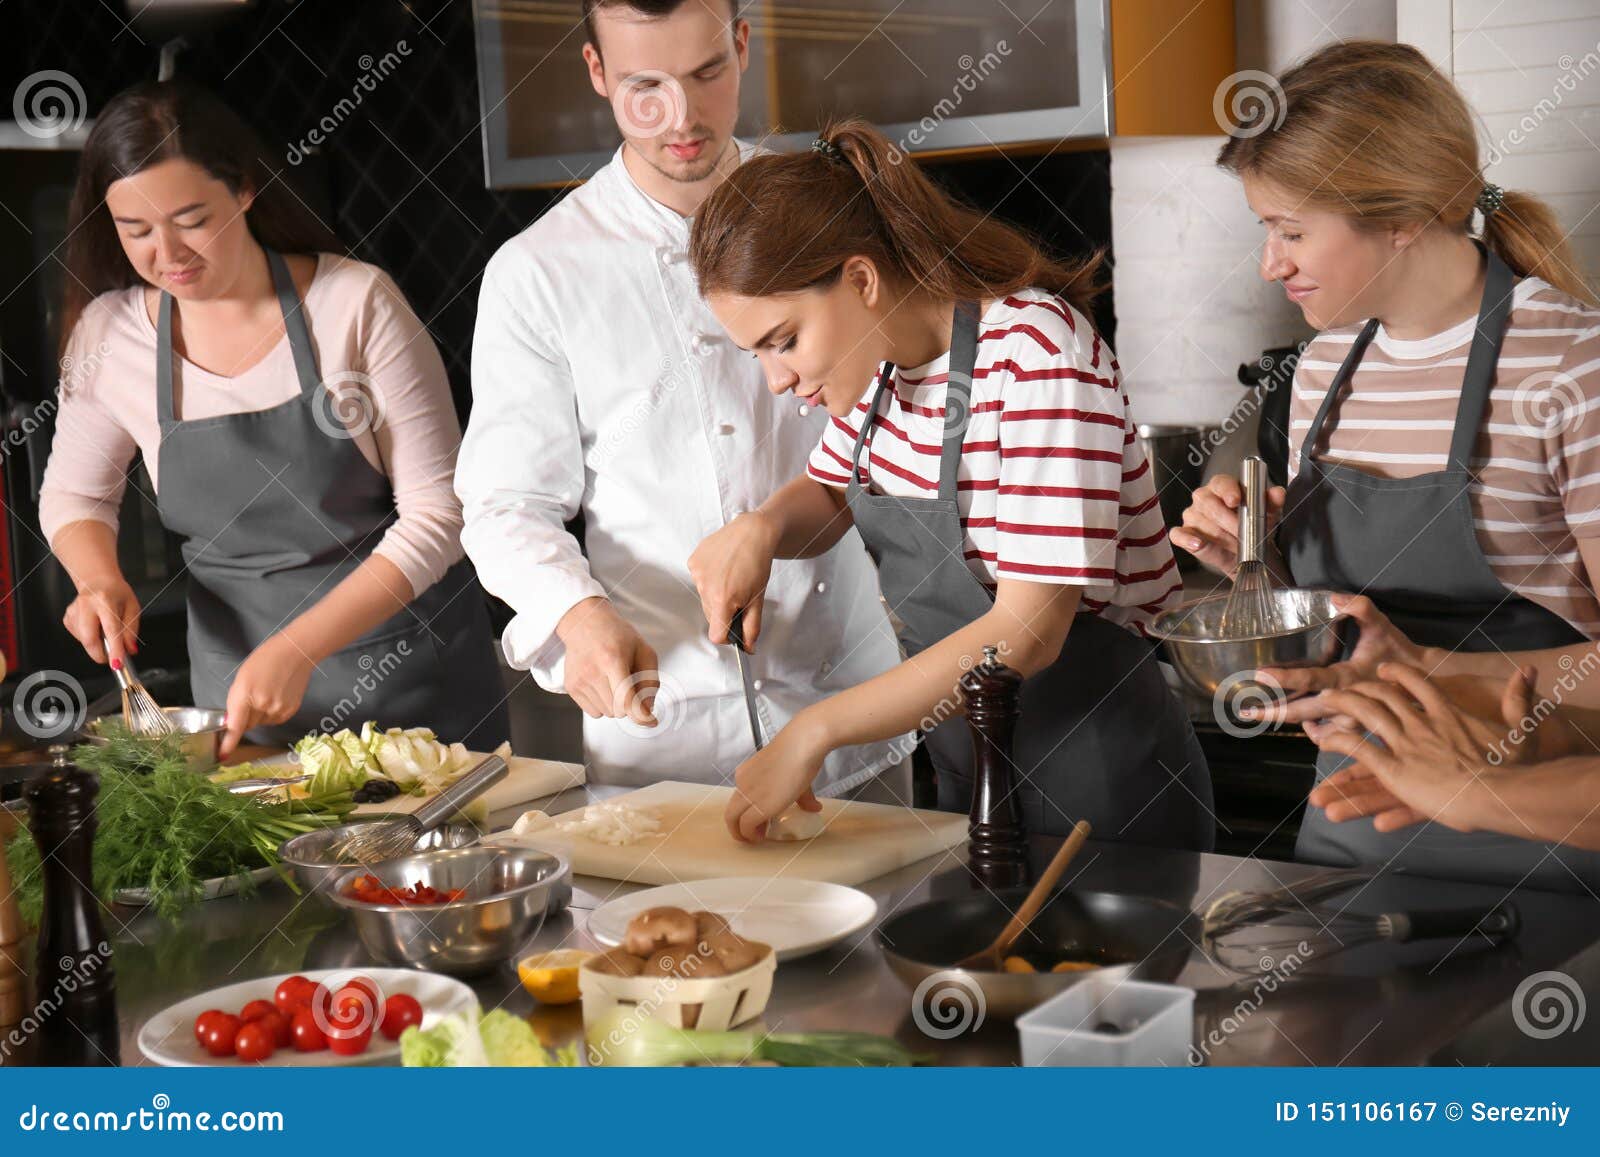 chef and group of young people during cooking classes